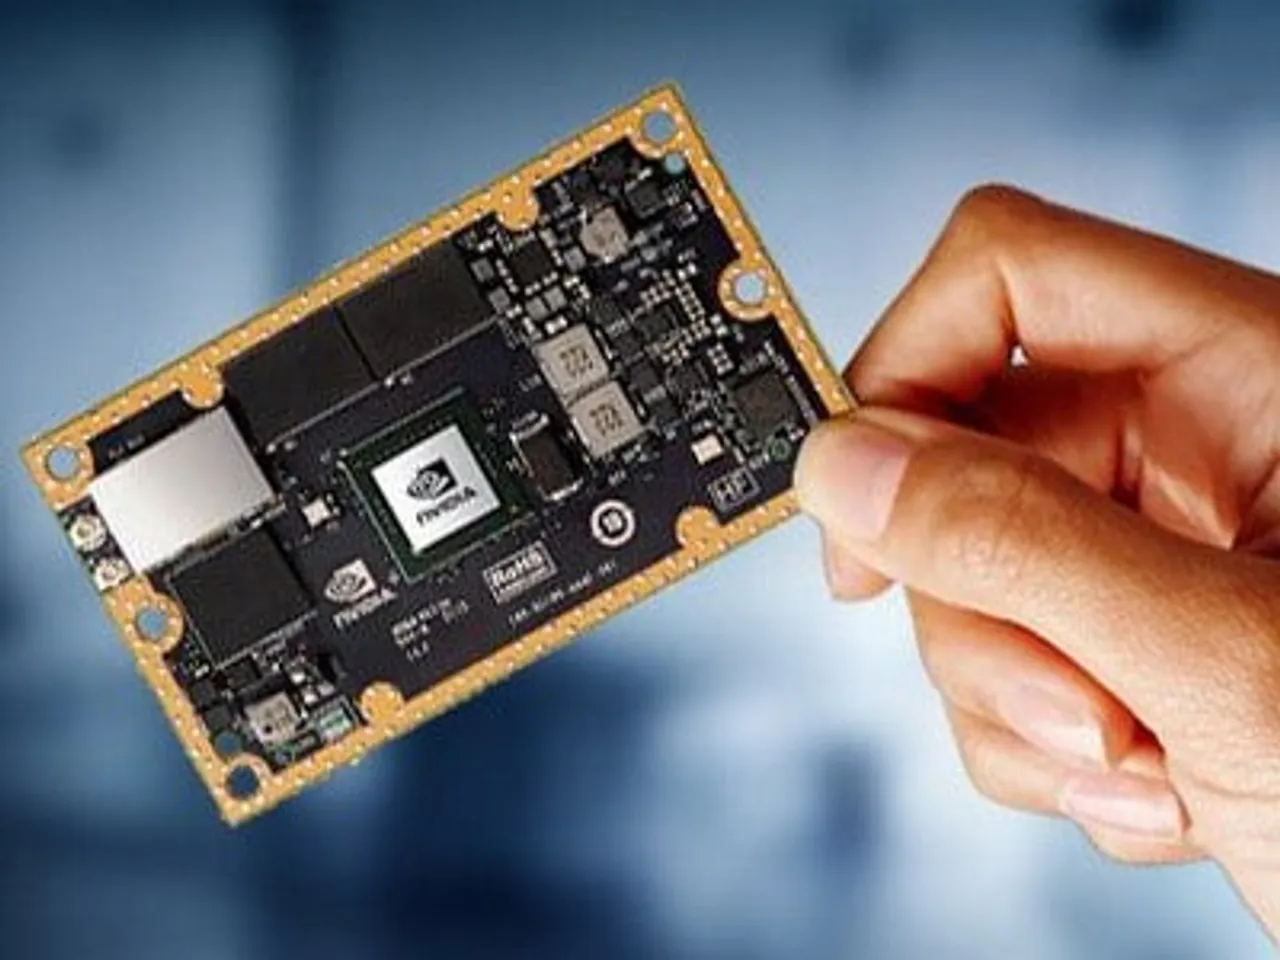 CIOL NVIDIA’s credit-card sized Supercomputer Jetson TX1 now in India